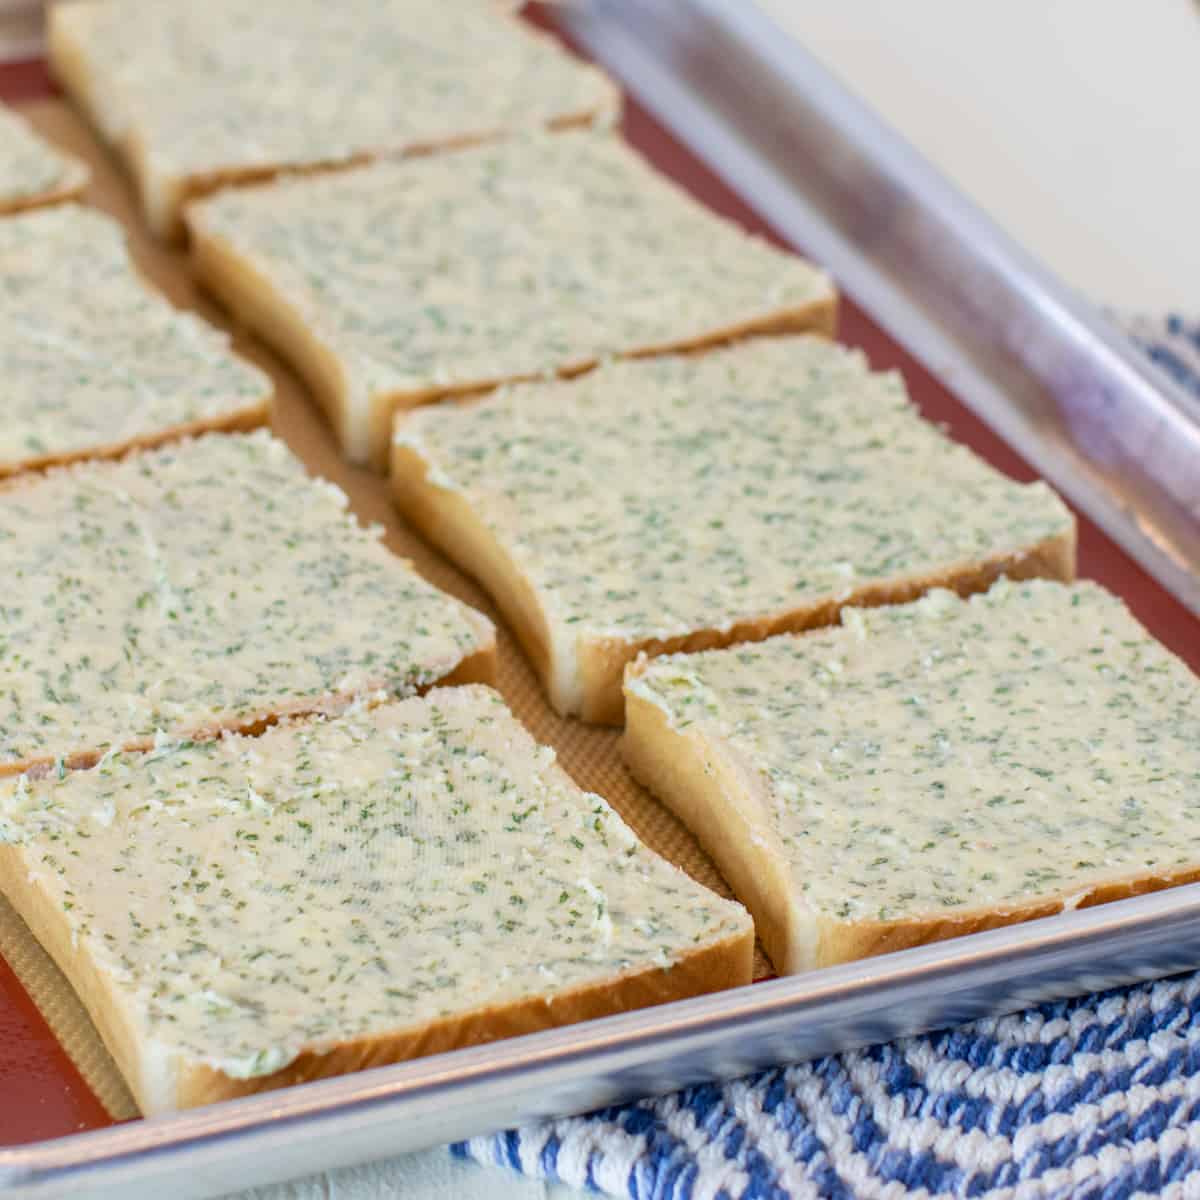 Garlic butter spread on sandwich bread slices all placed on a baking sheet.